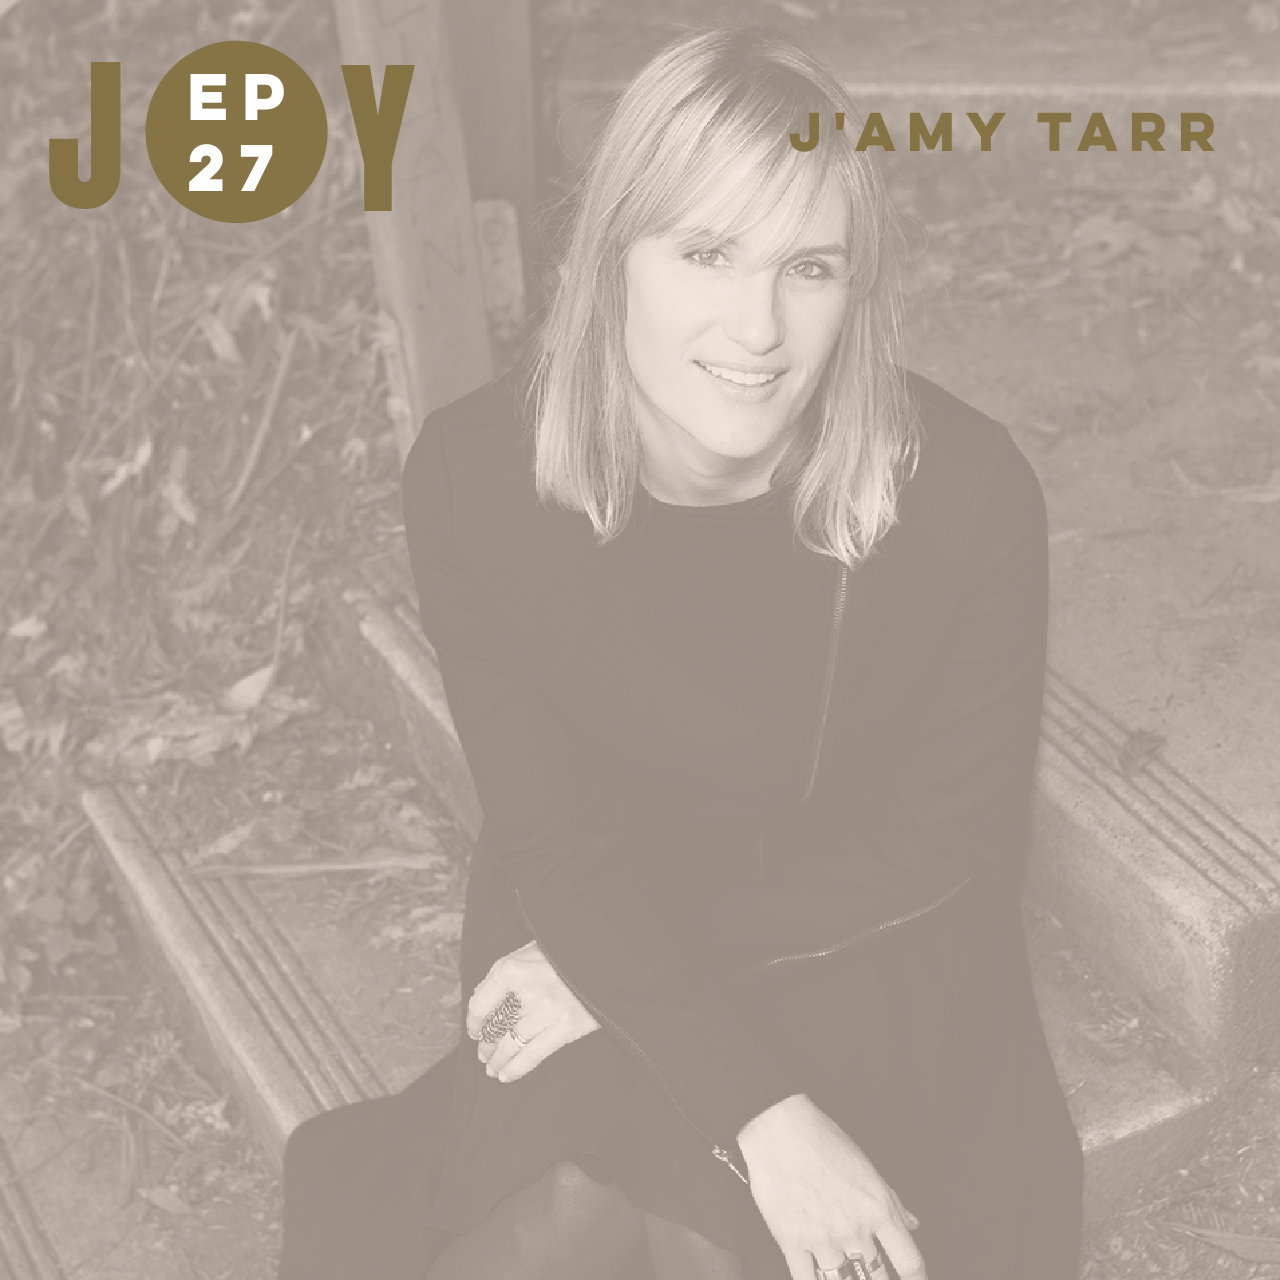 JOY IS NOW: LET'S TALK WORRY WITH J'AMY TARR